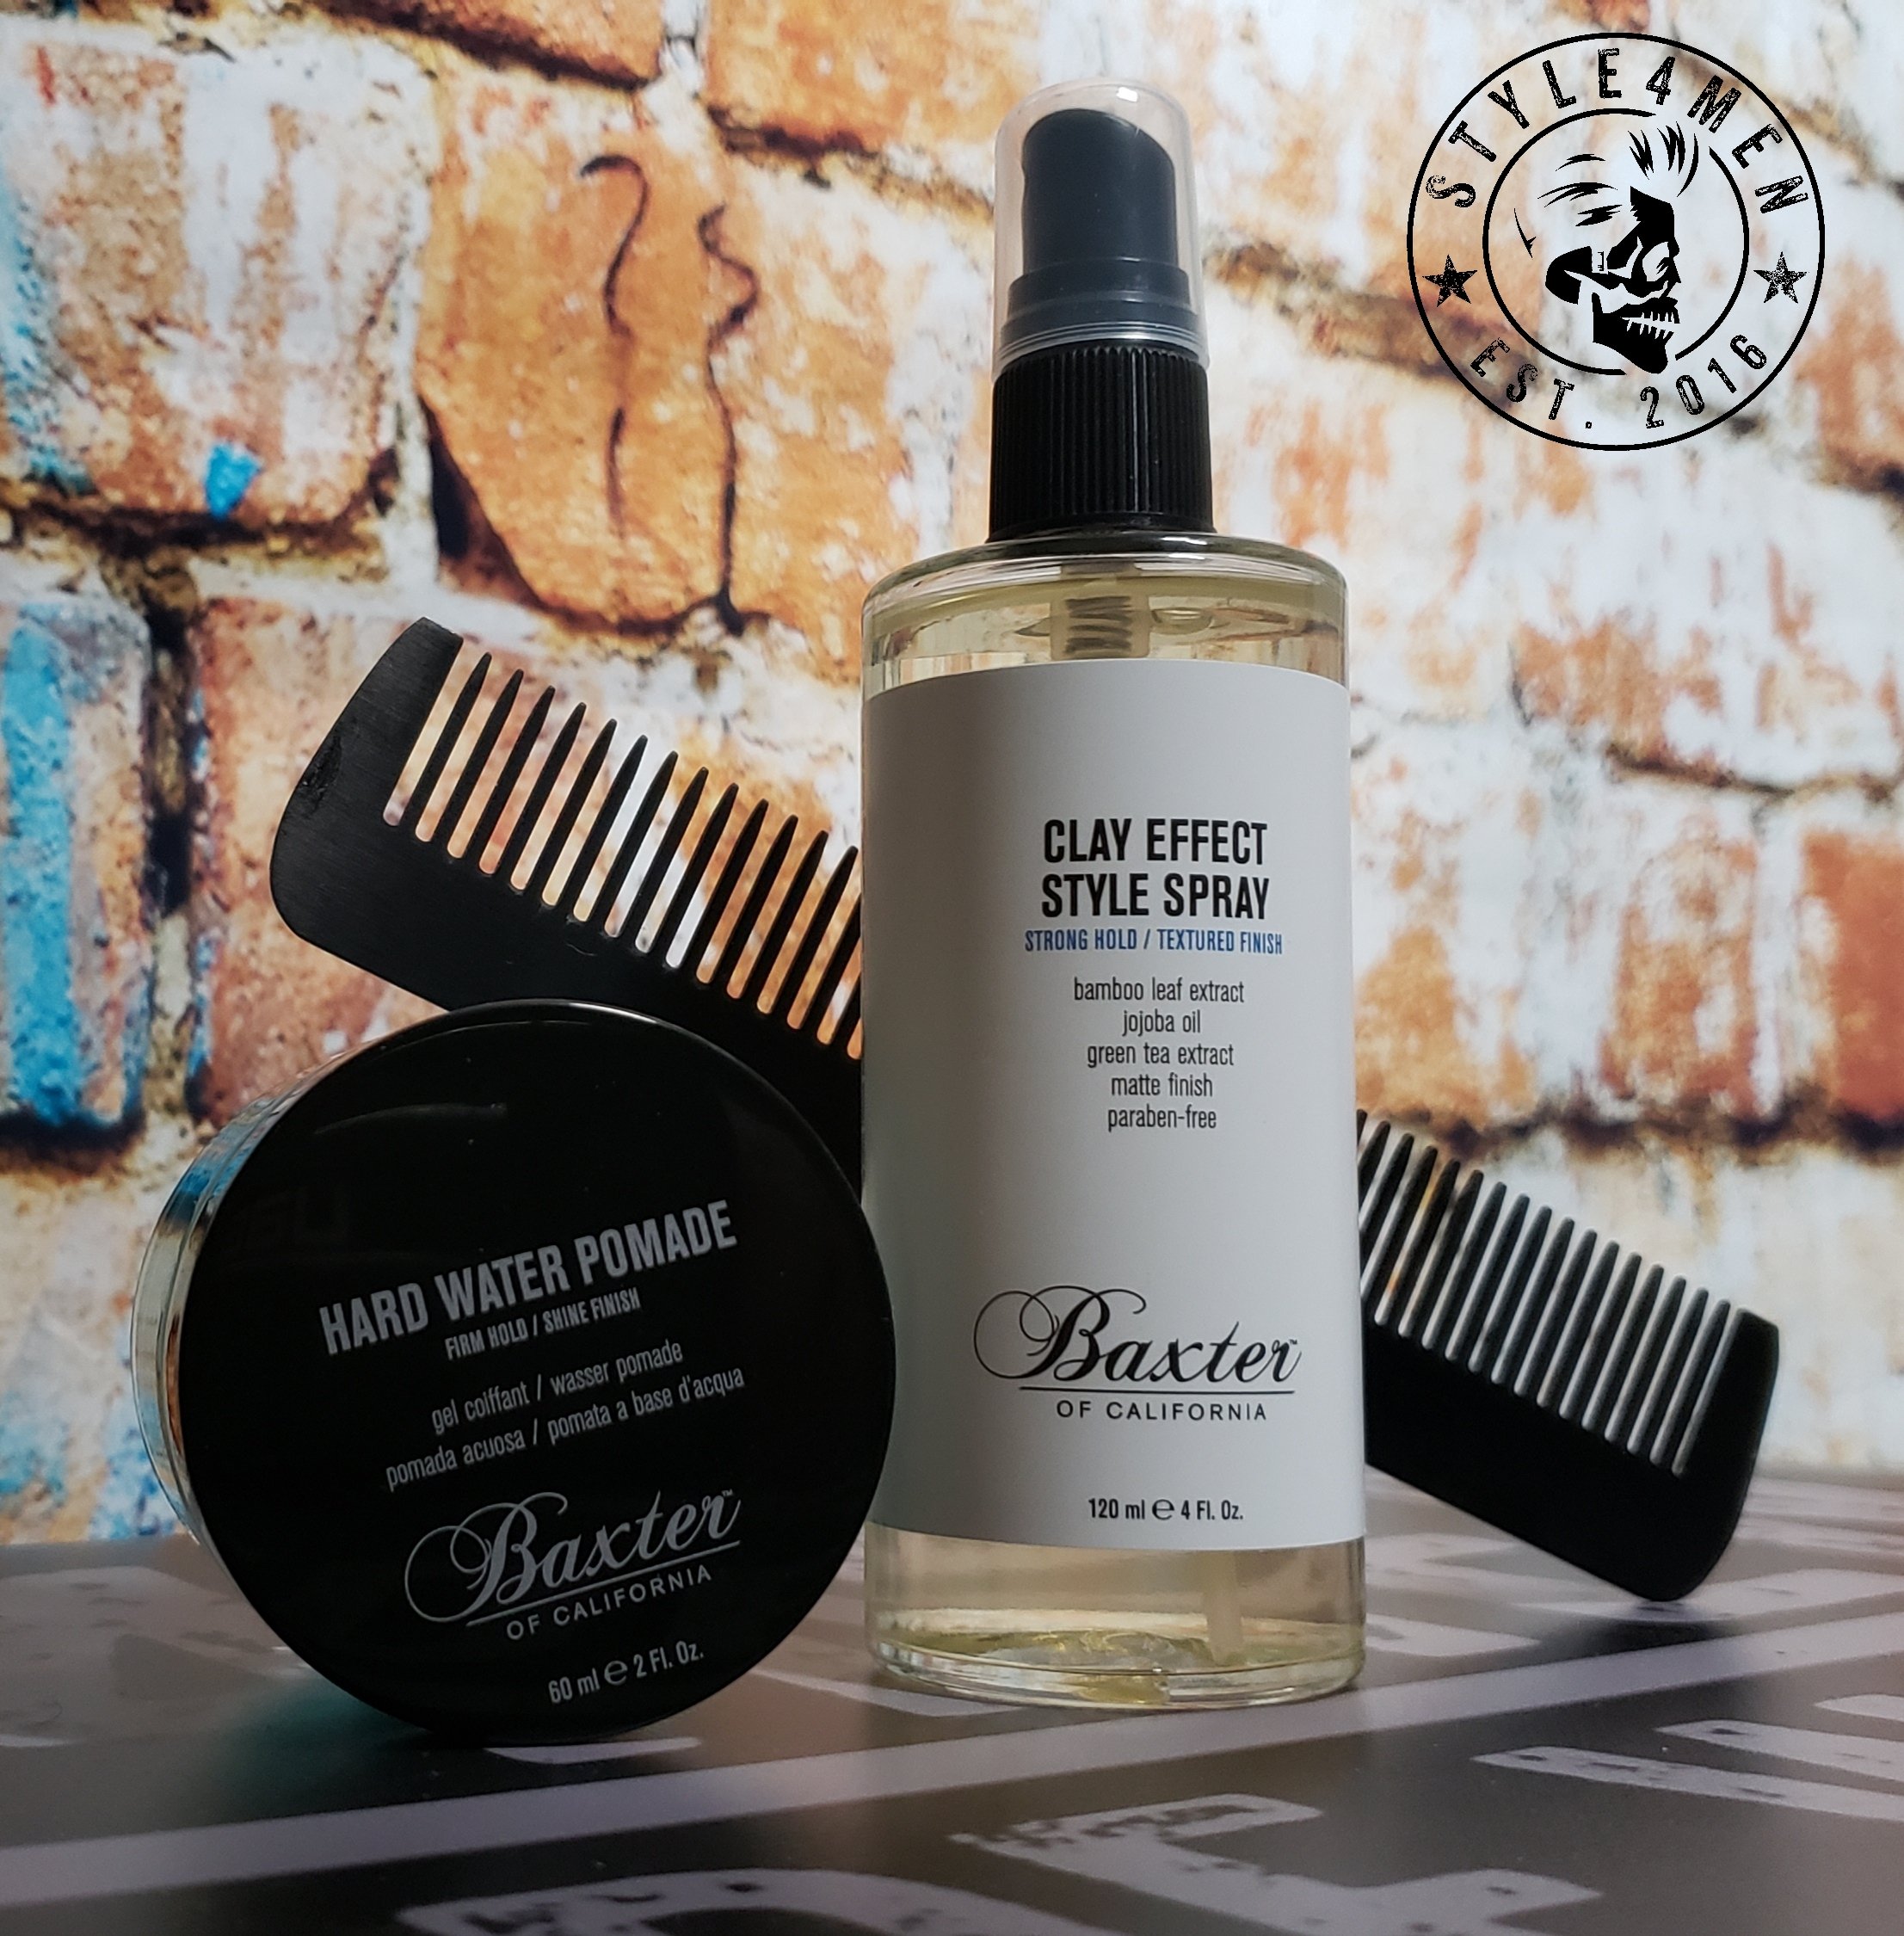 Baxter of California – Style Spray and Hard Water Pomade